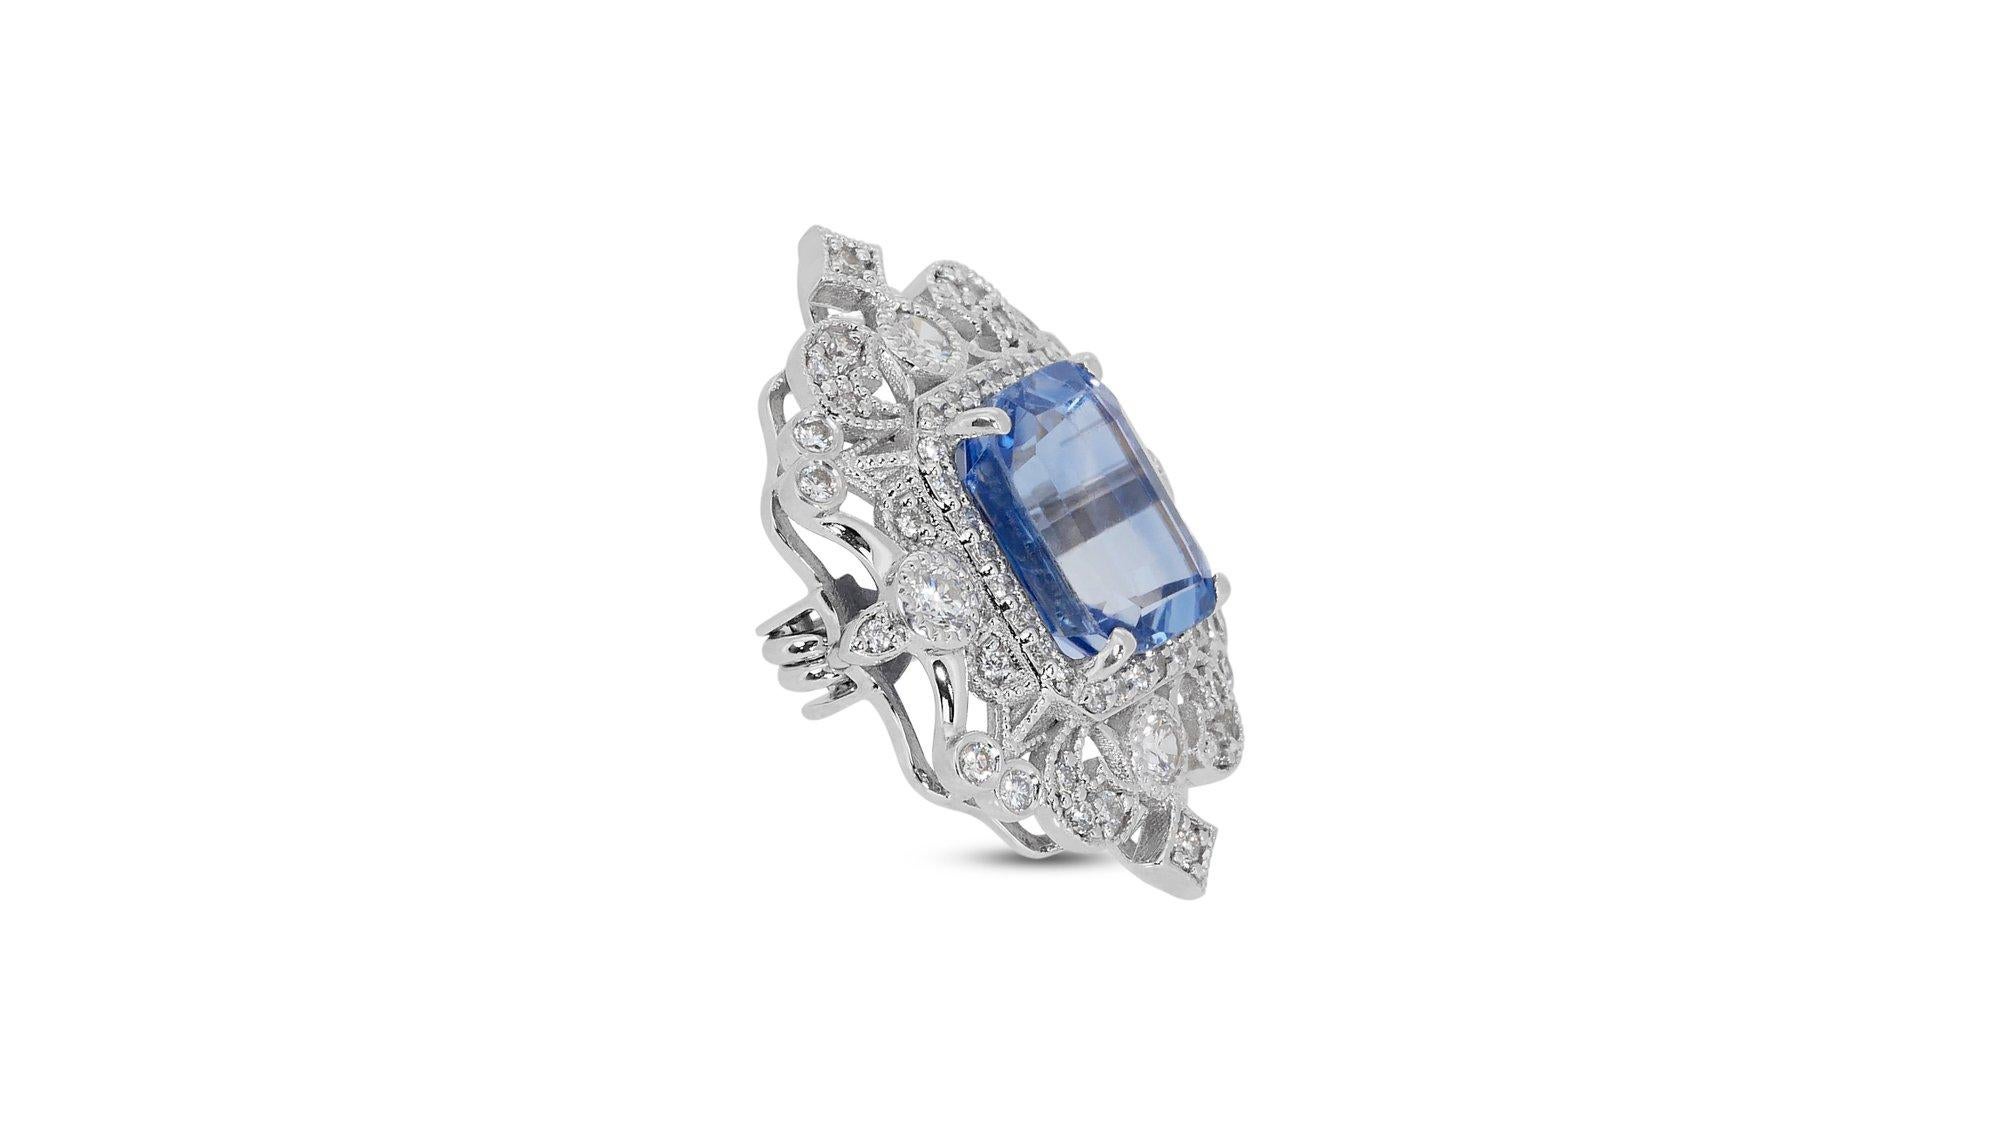 18k White Gold Brooch w/ 5.65 ct Sapphire and Natural Diamonds GIA Certificate For Sale 1